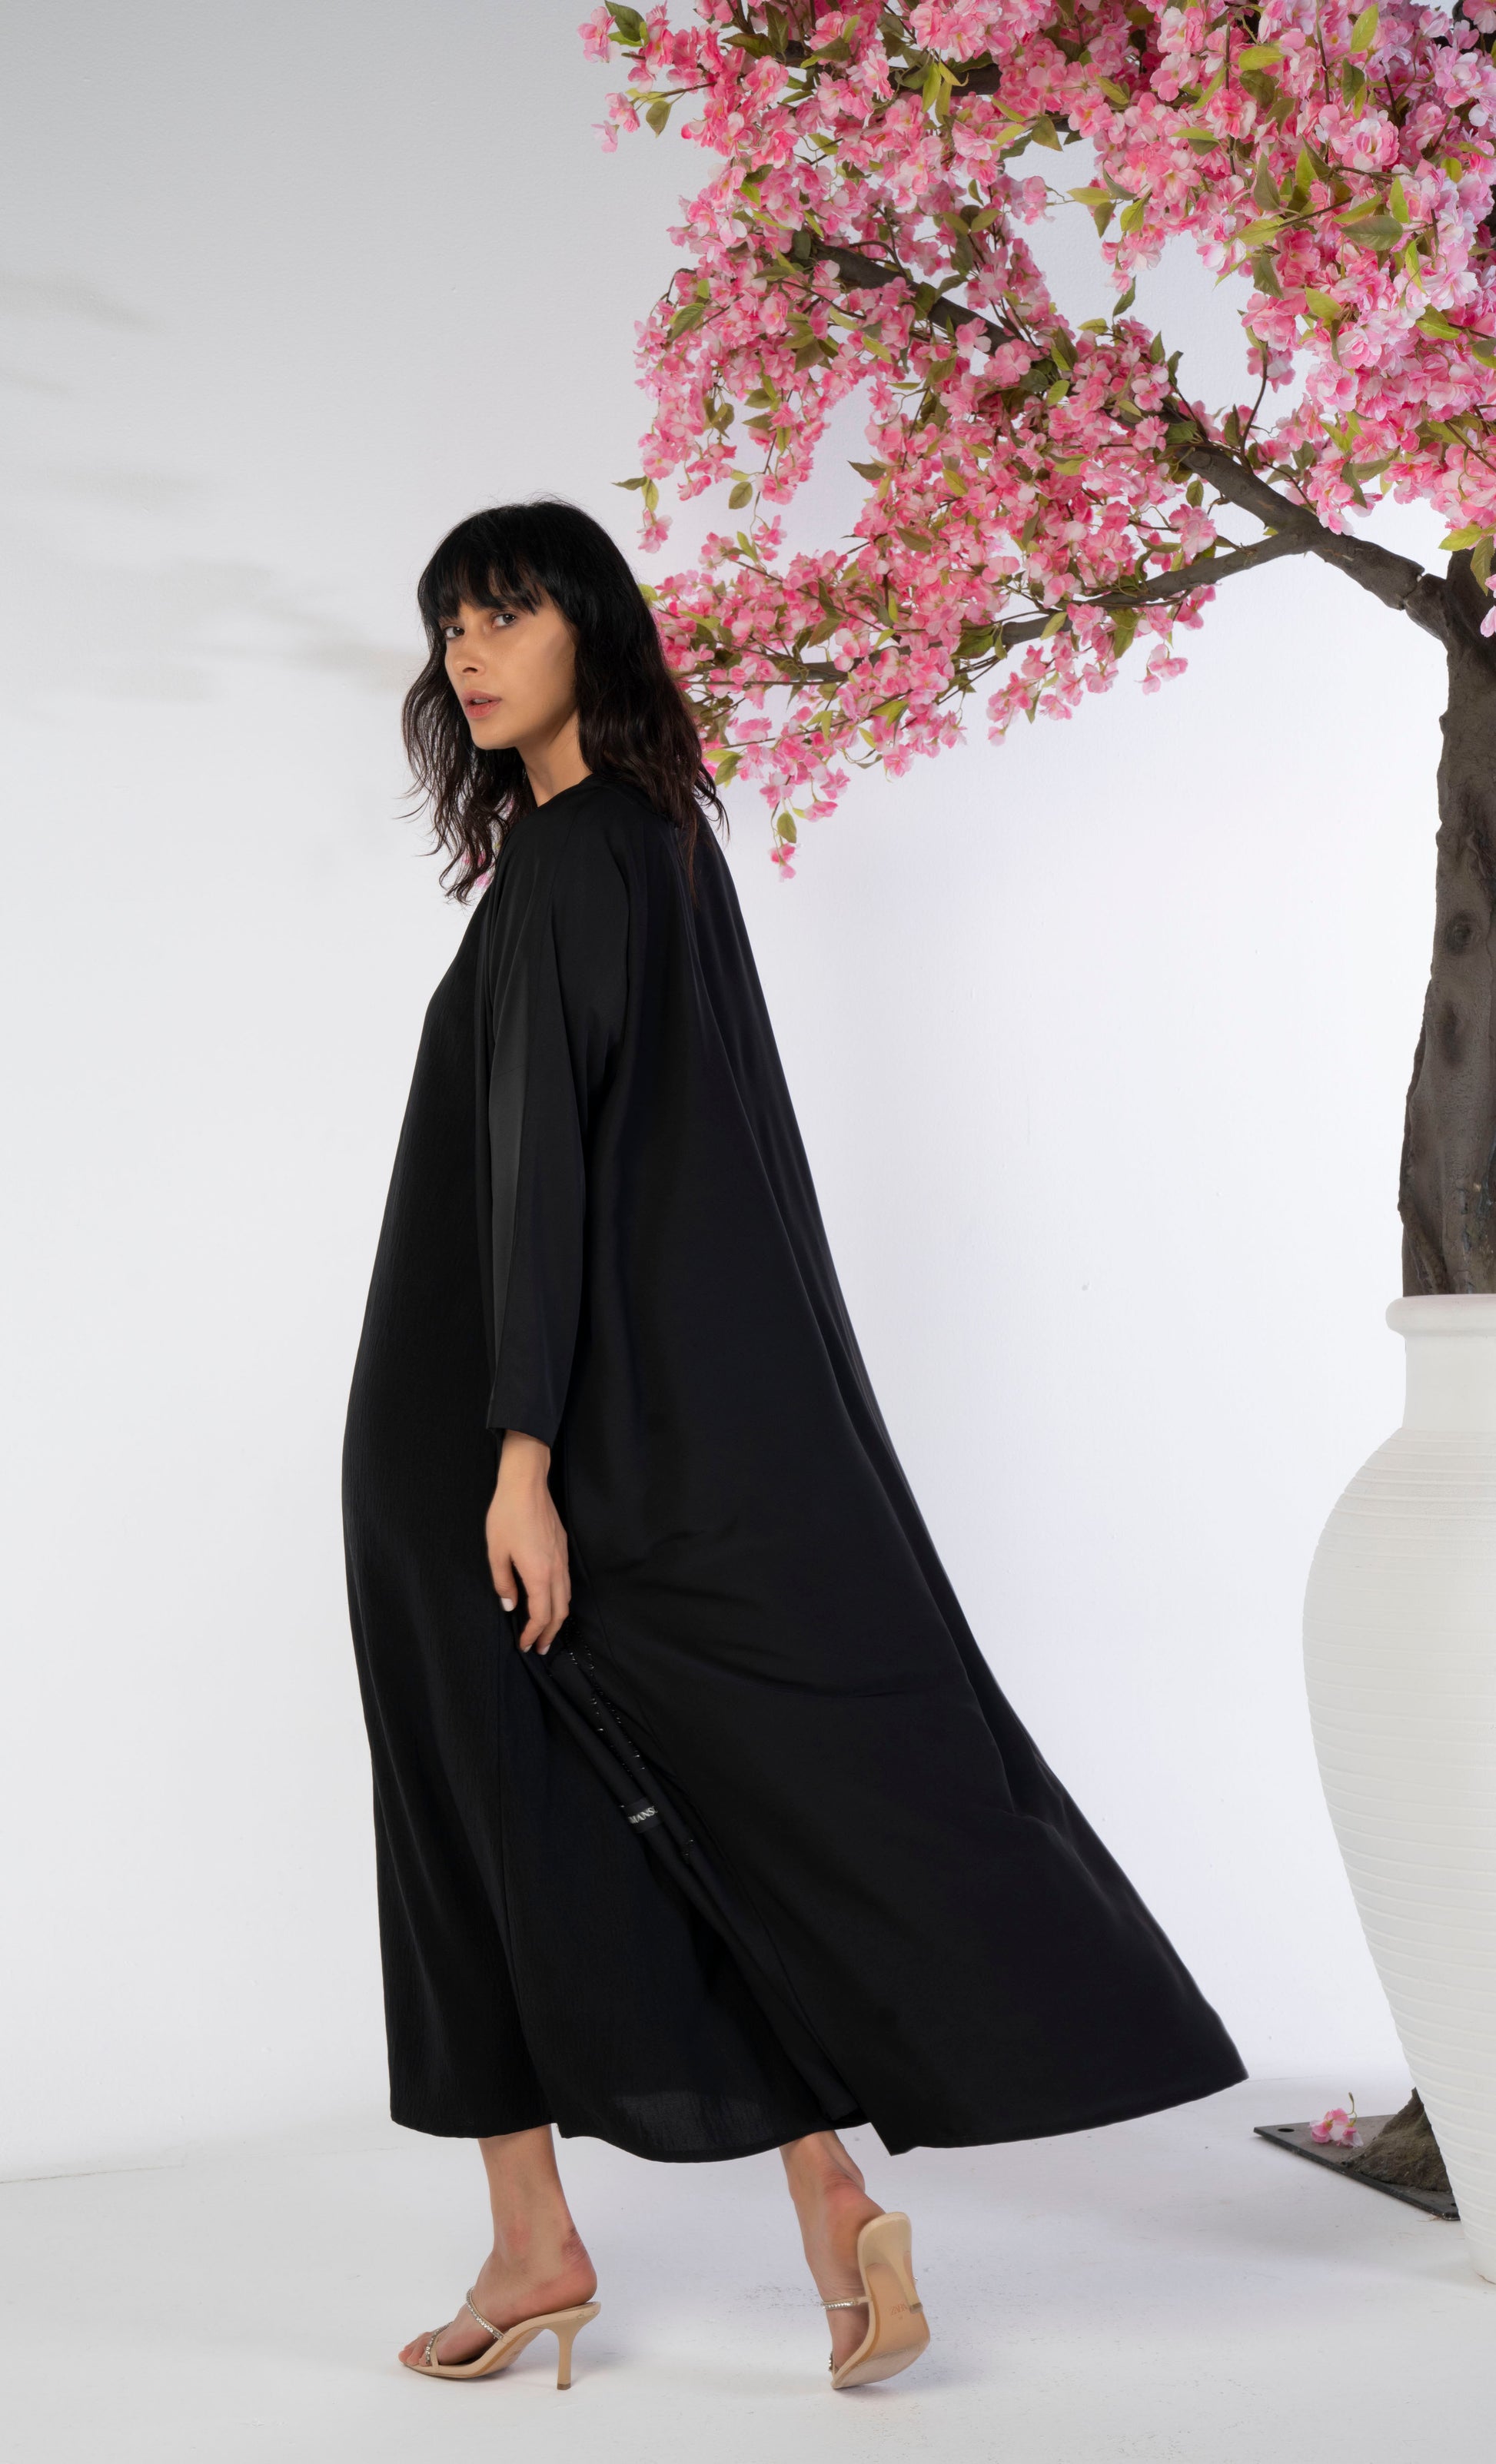 Bisht abaya for women with floral embroidery on sides